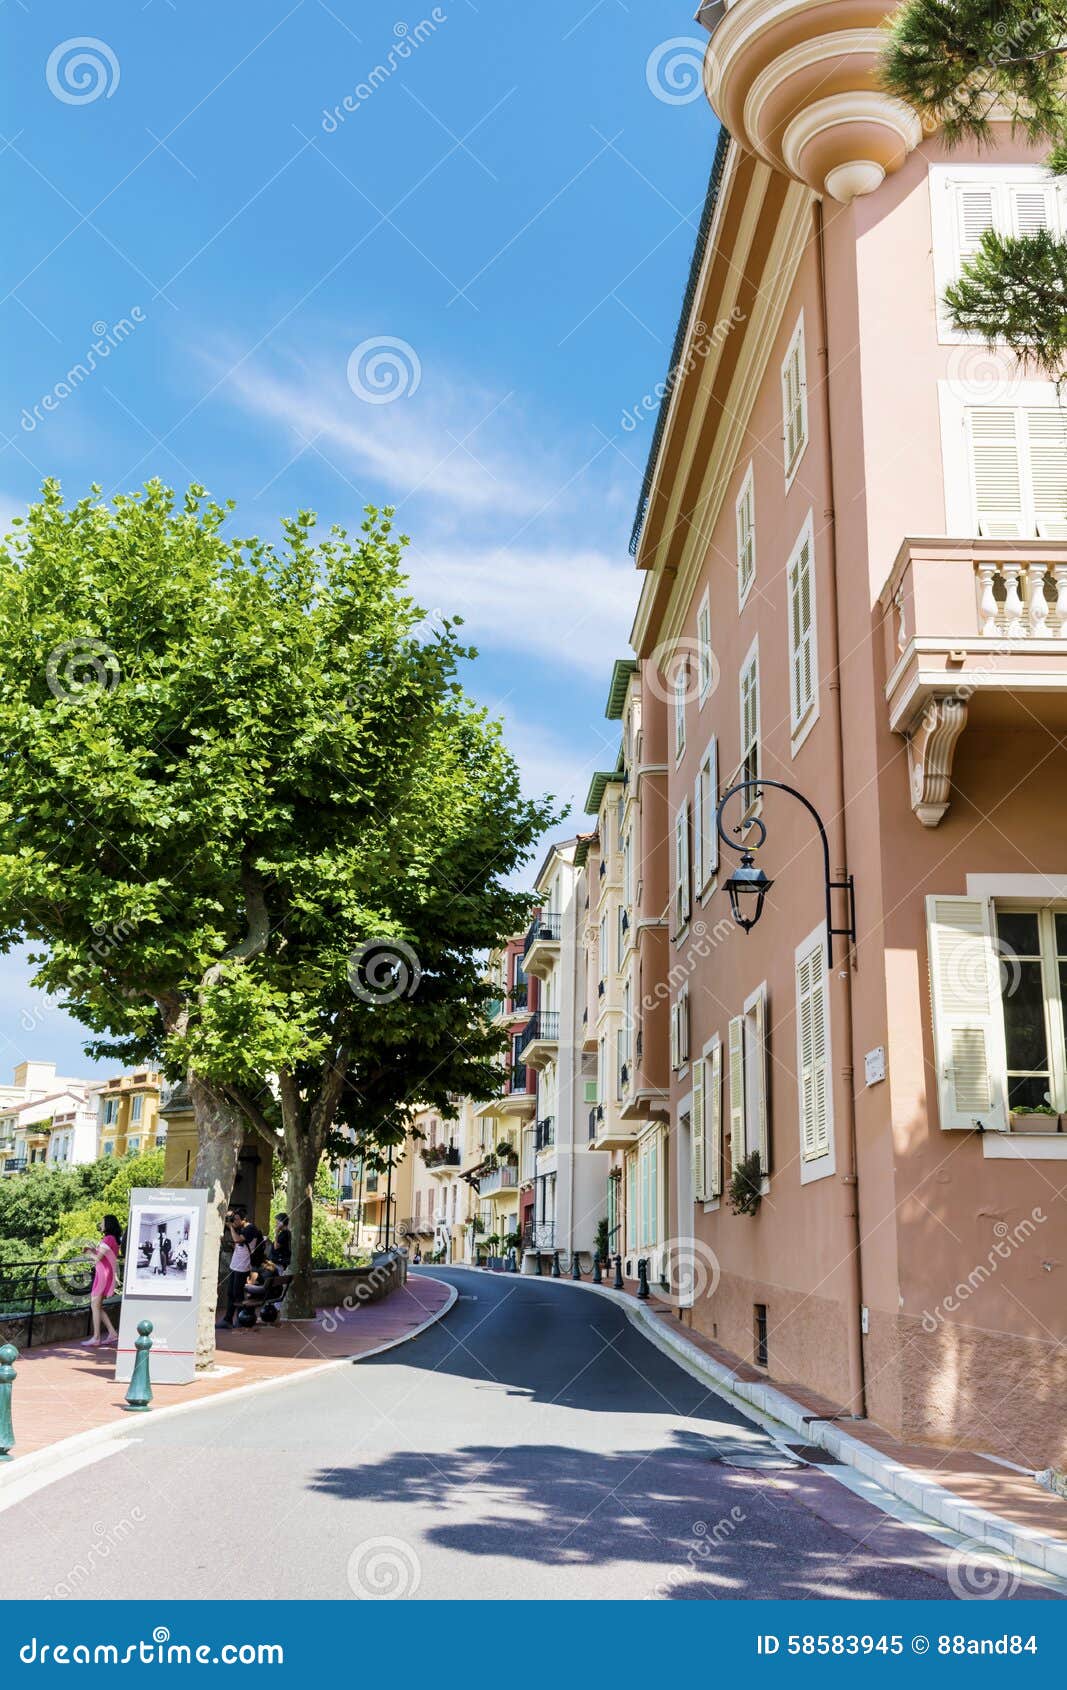 Typical Main Street in Old Town in Monaco in a Sunny Day Editorial